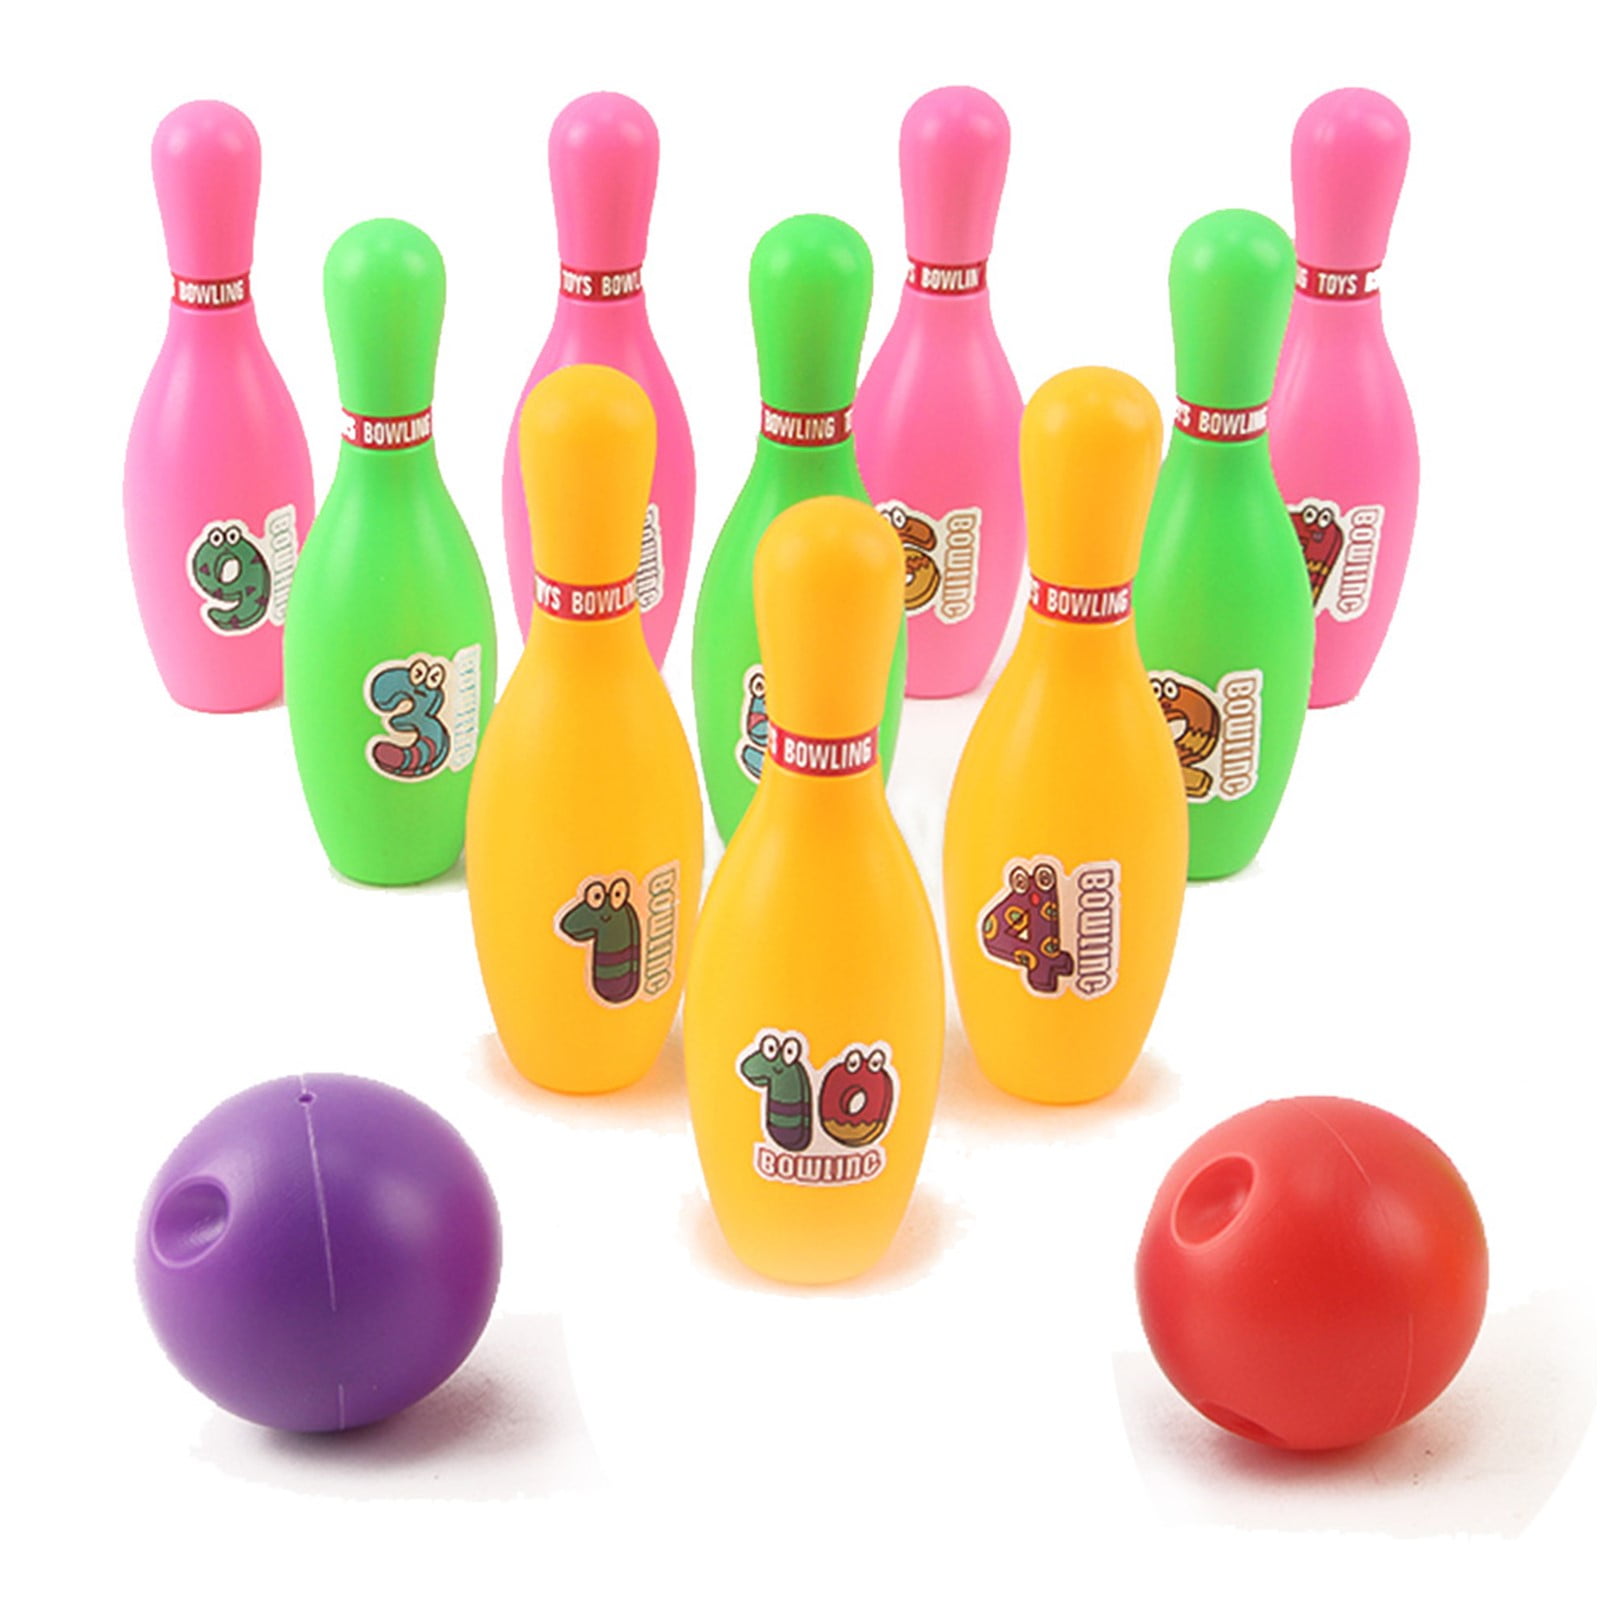 Children Indoor Bowling Toy Set Bowling Toy Set Game Colorful Plastic Bowling Ball Pins Party Favors Kit Sport Toddler Educational Toys 12 Pcs Gift for Kids Baby Boys Girls Early Development Toys 